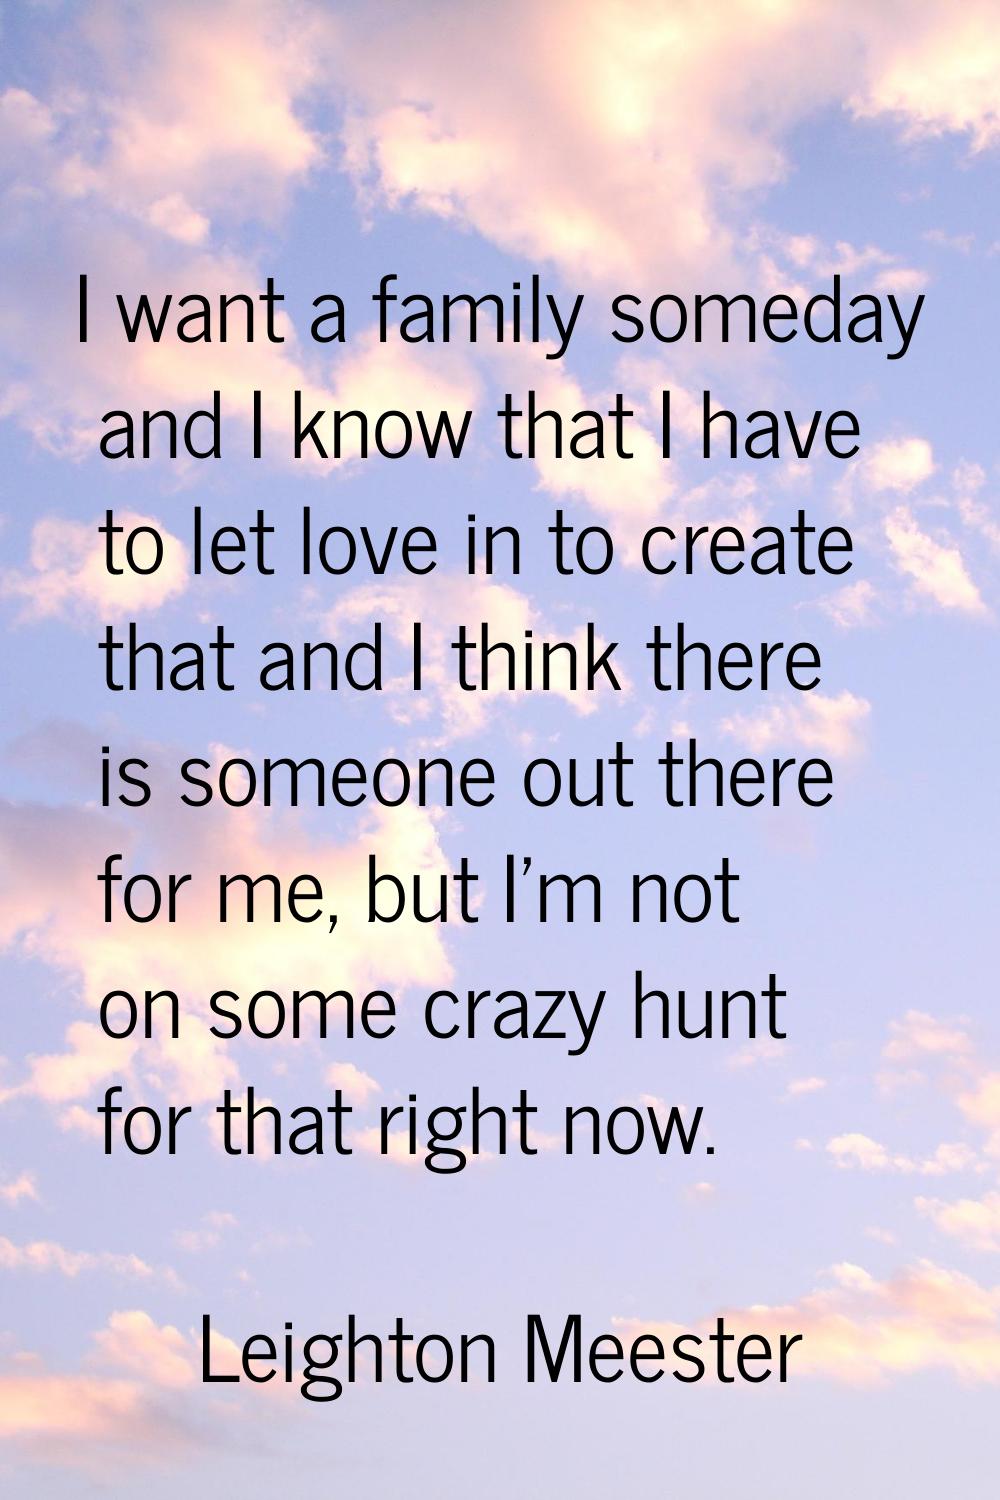 I want a family someday and I know that I have to let love in to create that and I think there is s